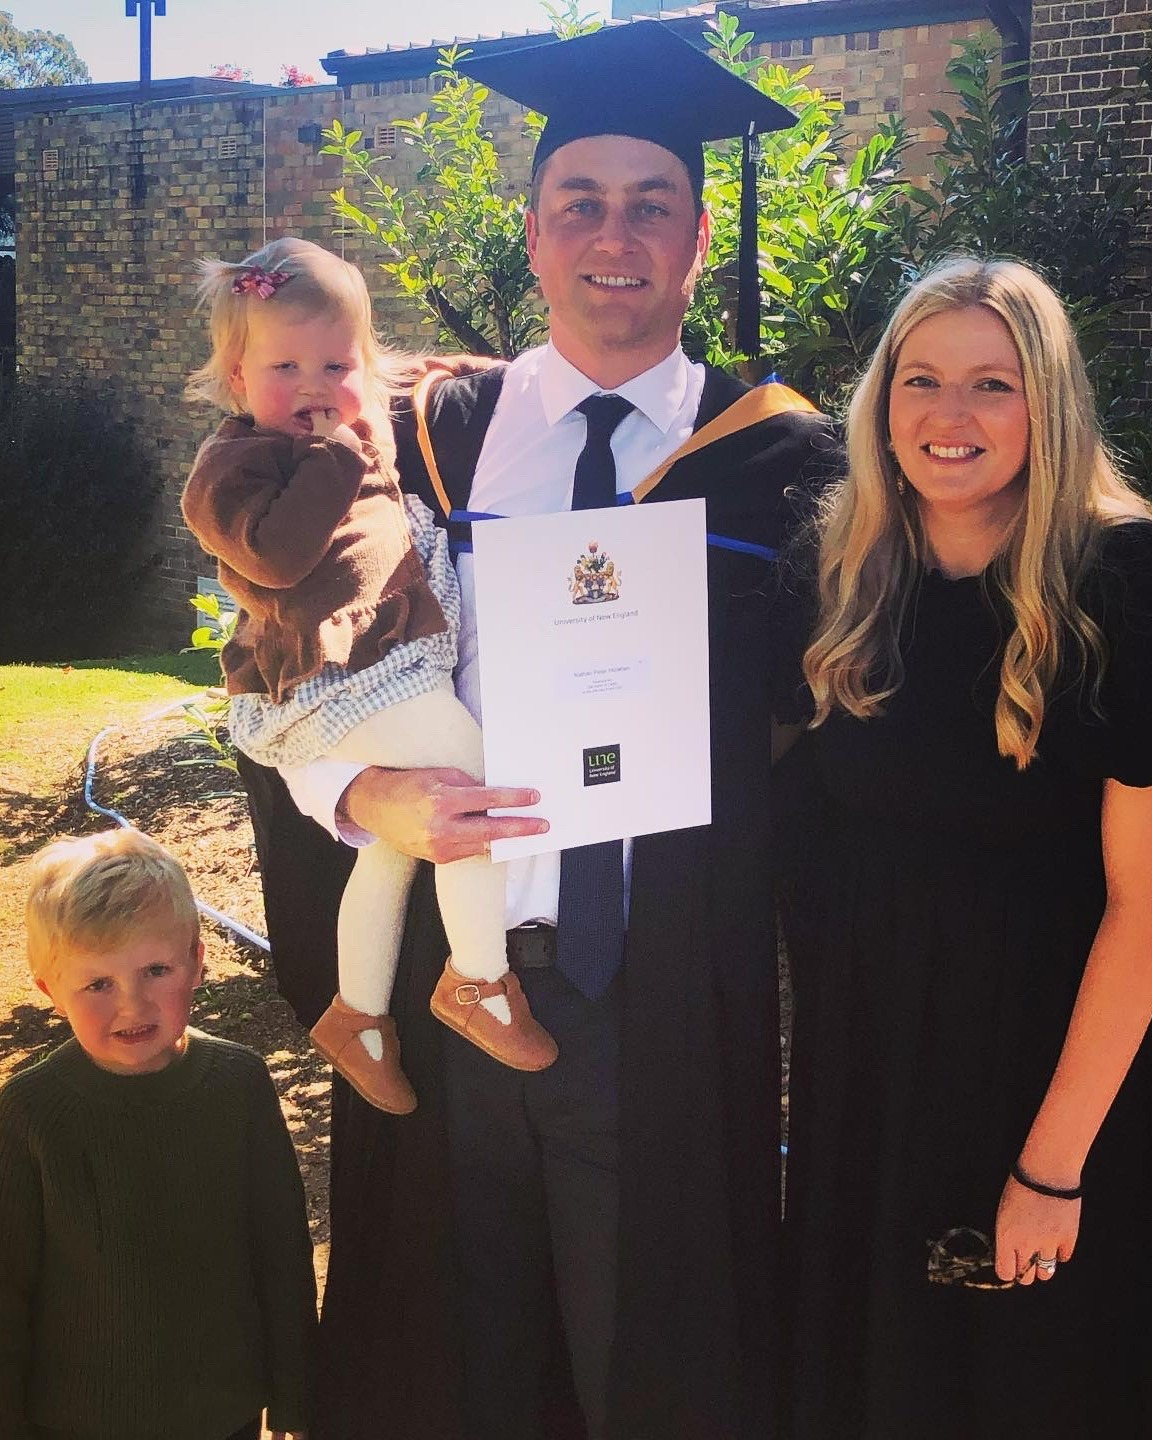 Man with wife and two small children at graduation